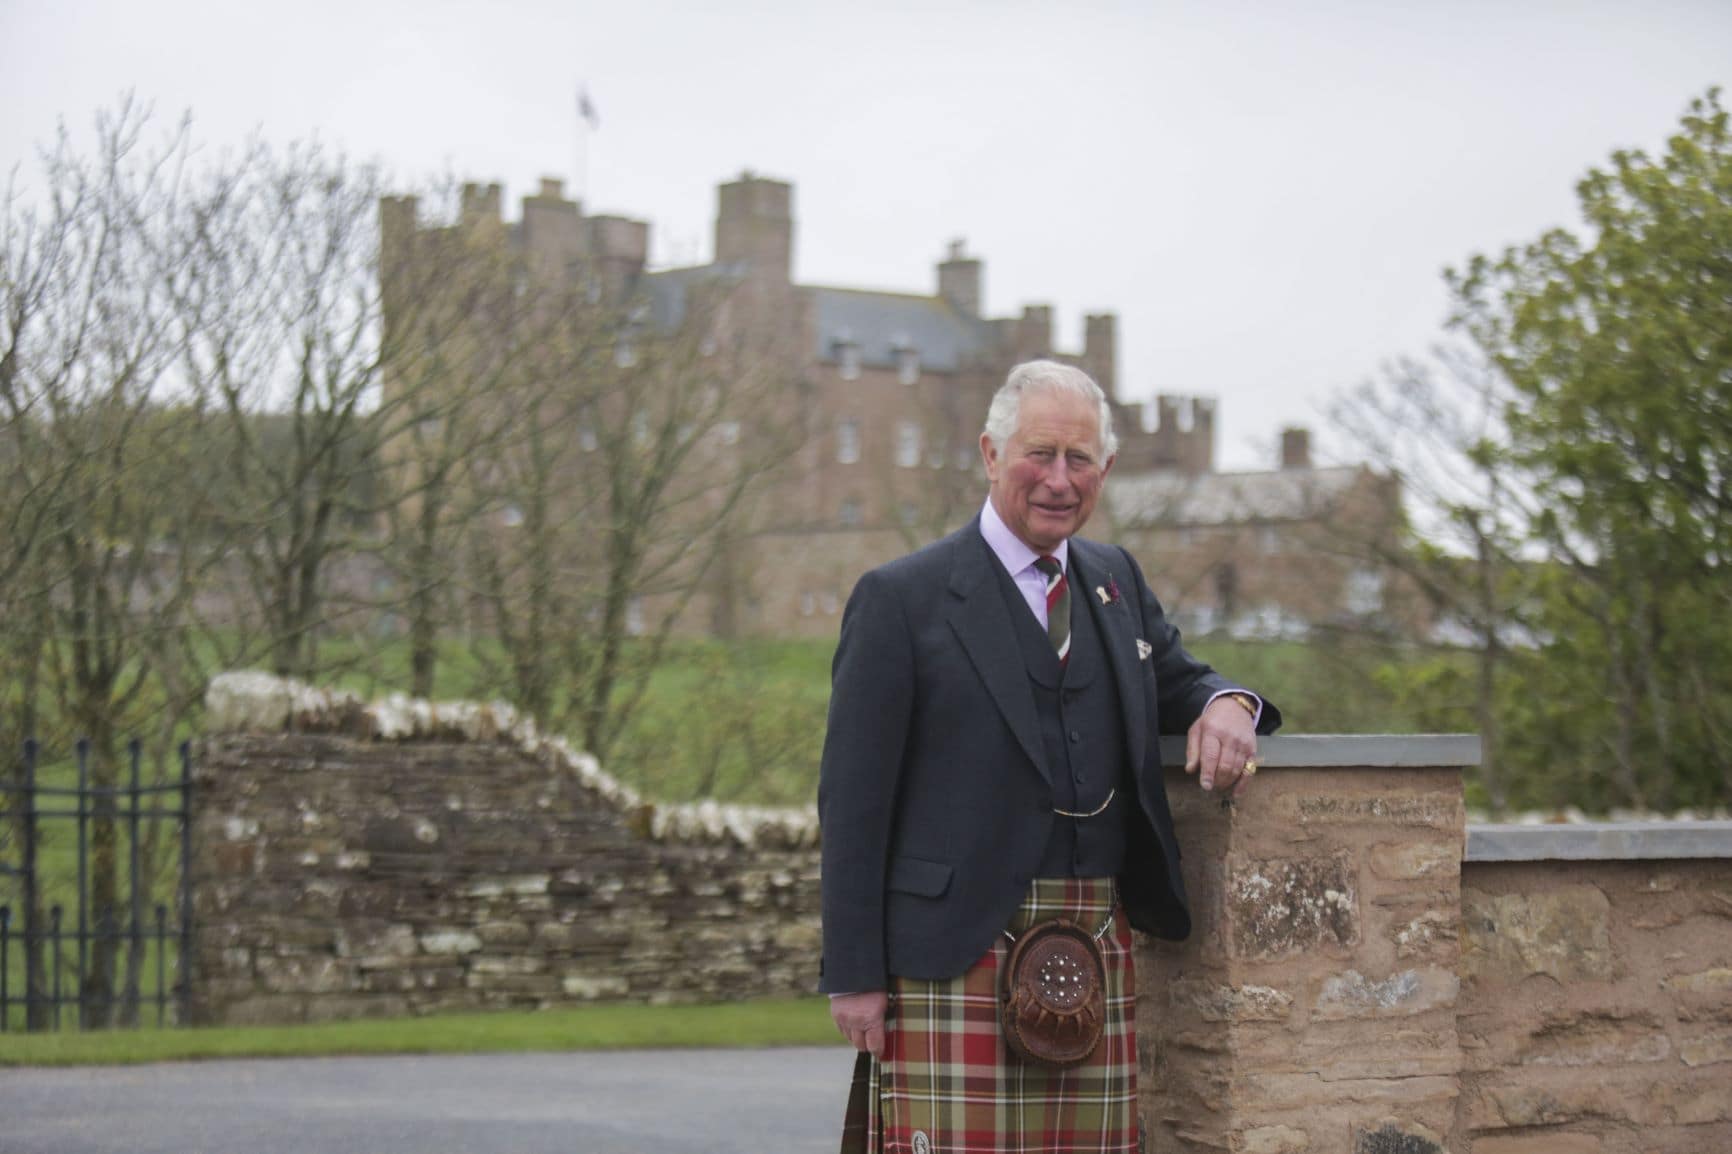 The Prince Charles attends the opening of The Granary Lodge at Castle of Mey